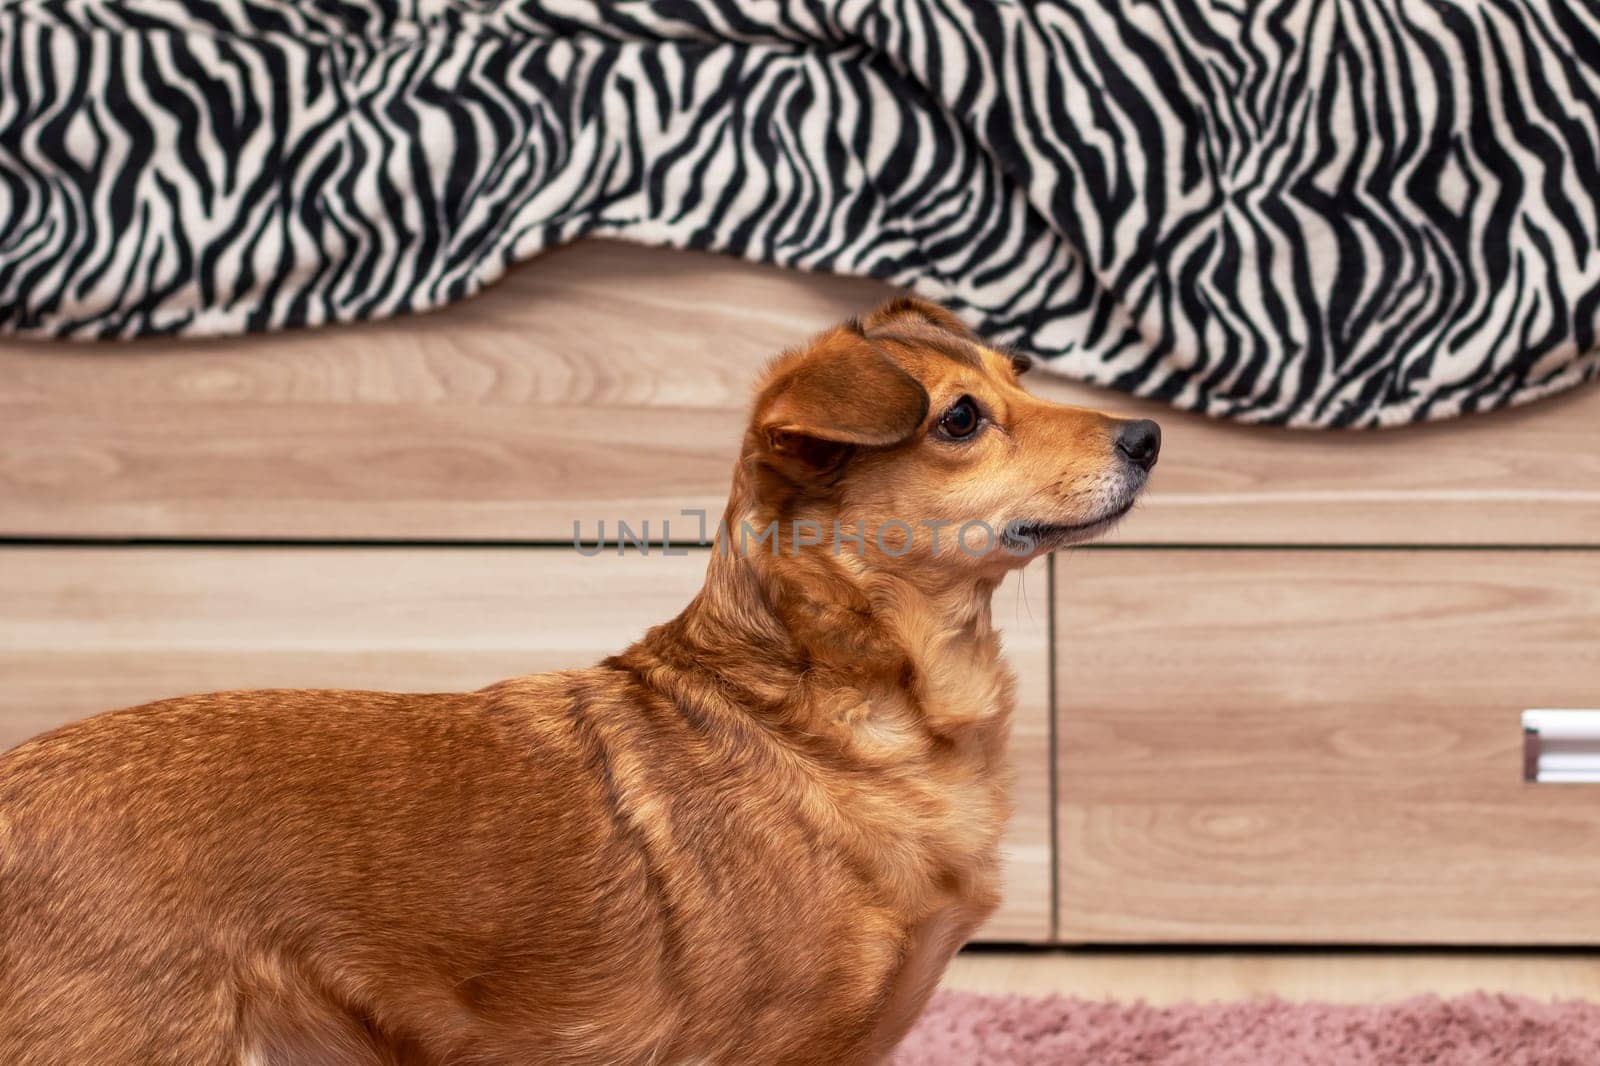 A carnivore dog breed with a fawn coat standing in front of a zebra print couch. This terrestrial animal has a snout and is a loyal companion dog